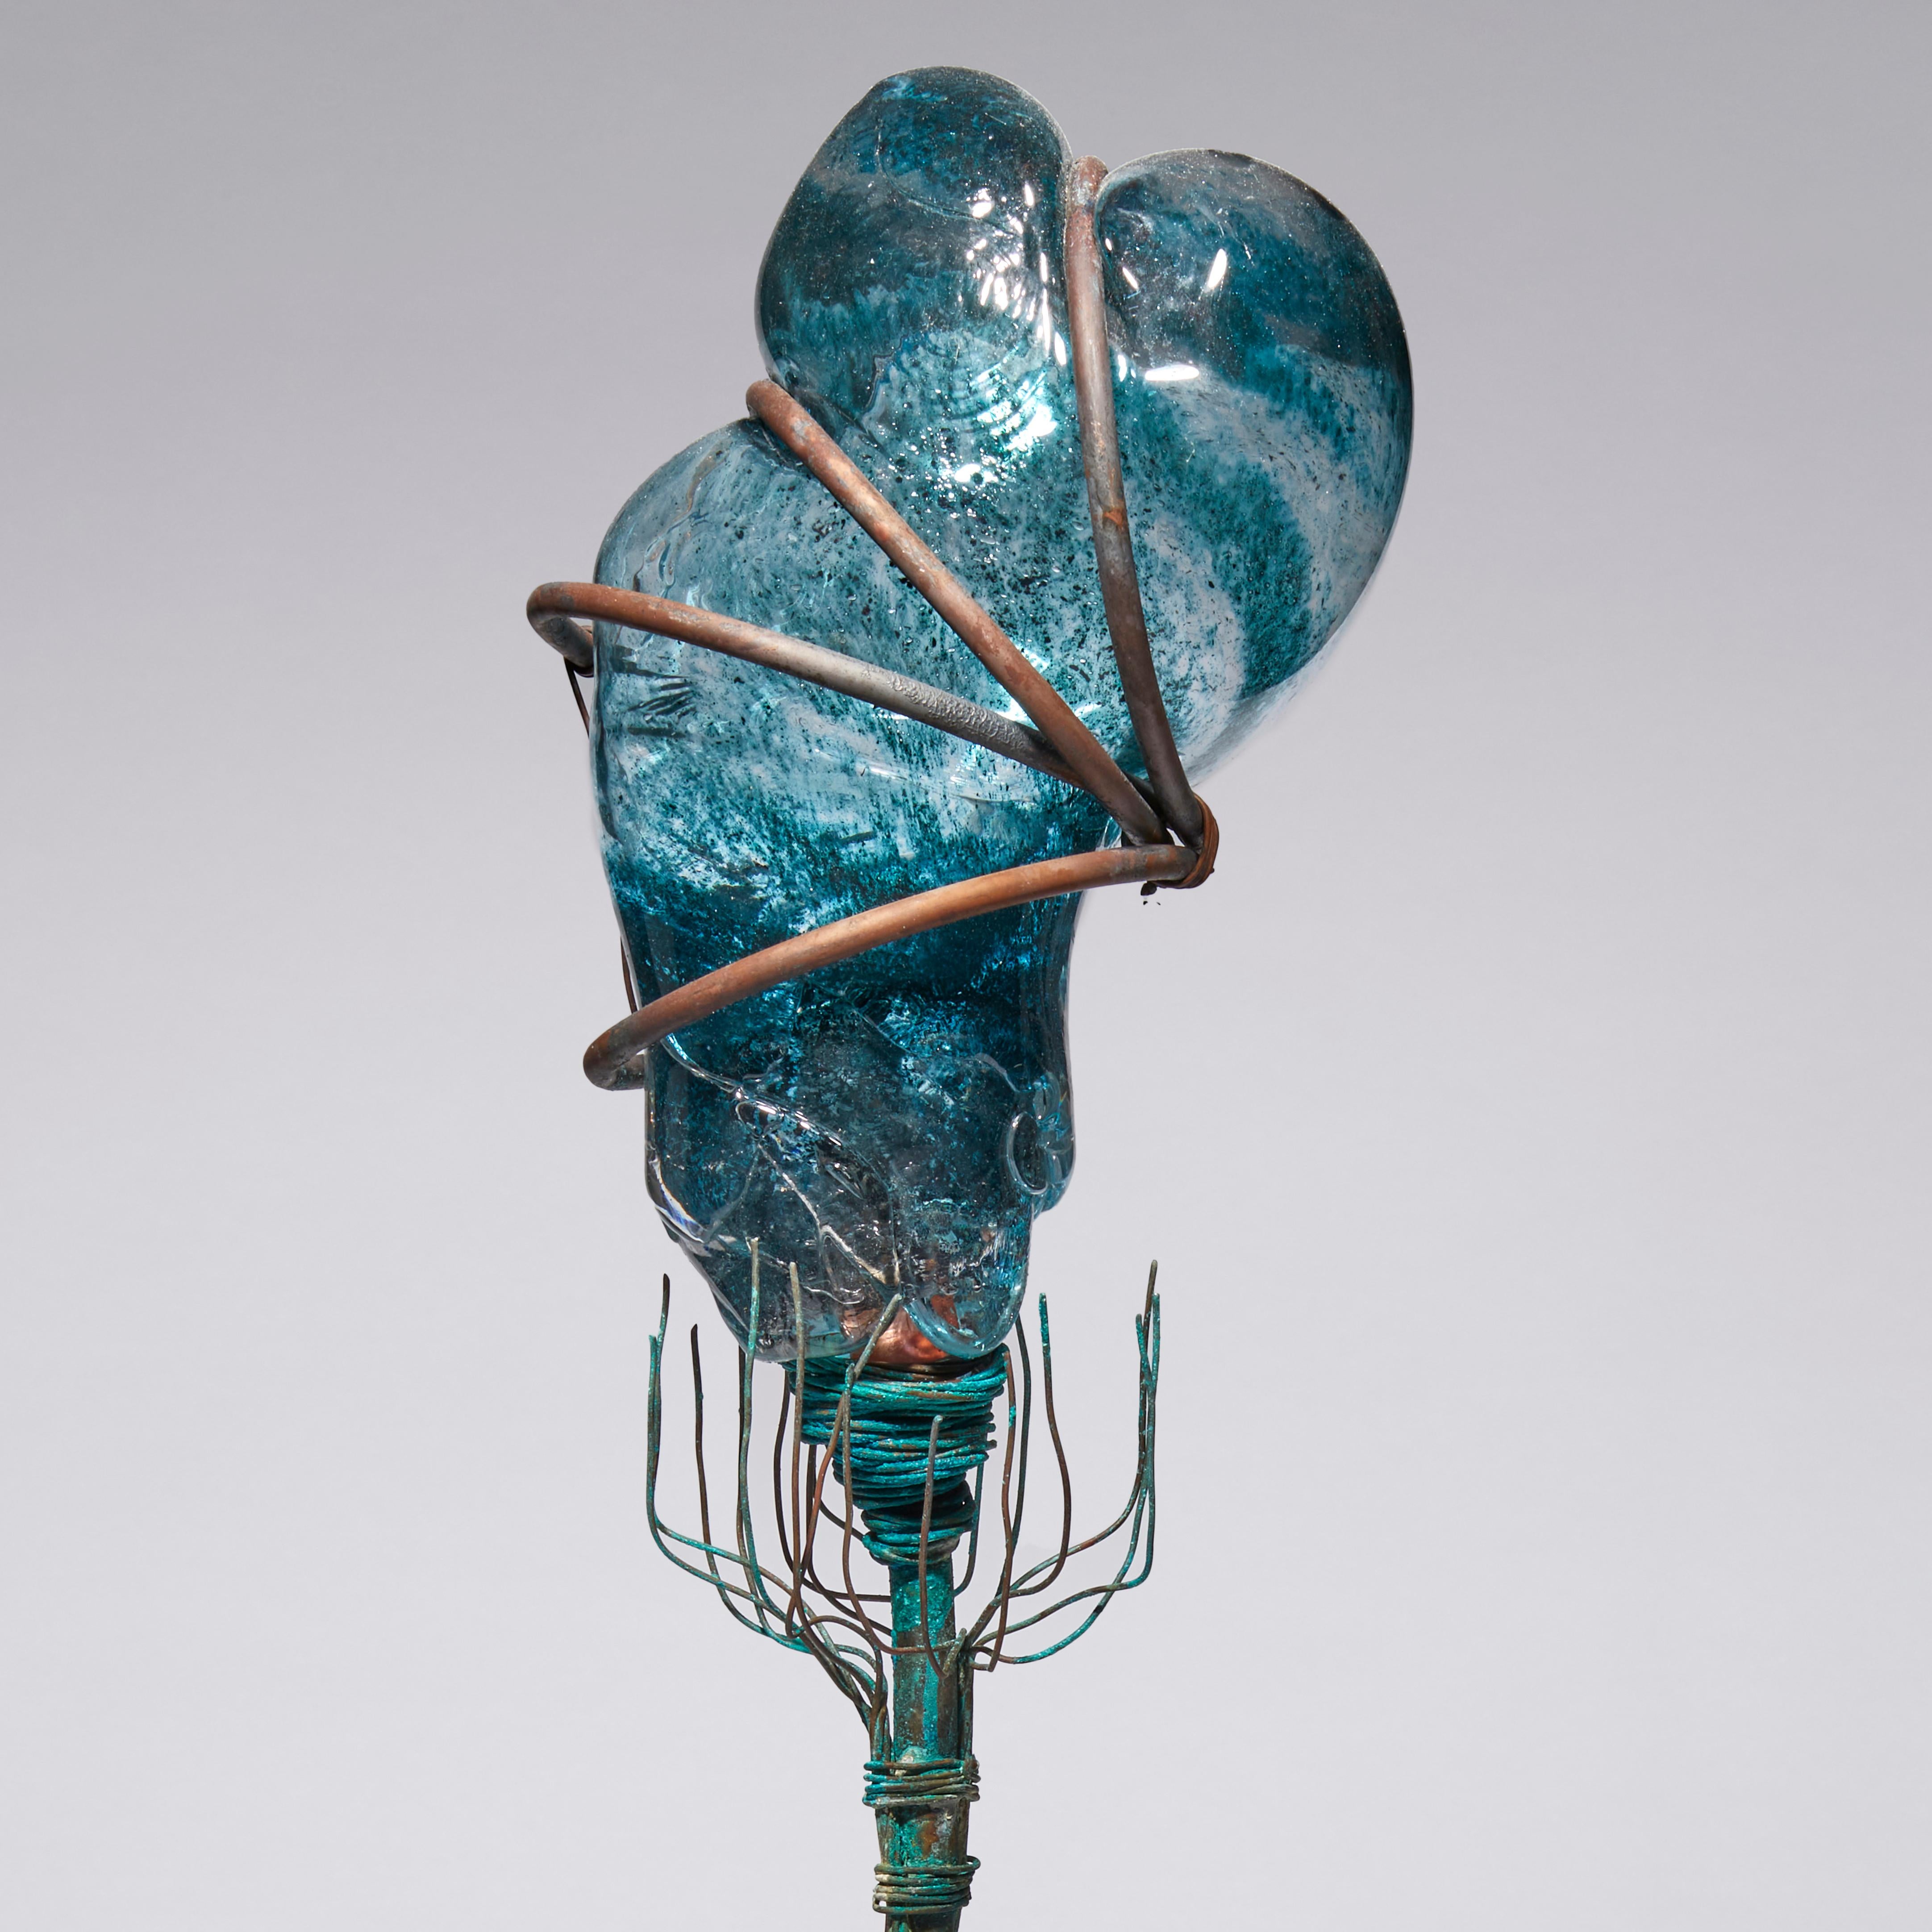 Contemporary Impostor Syndrome, a Unique Glass, Bronze and Copper Sculpture by Chris Day